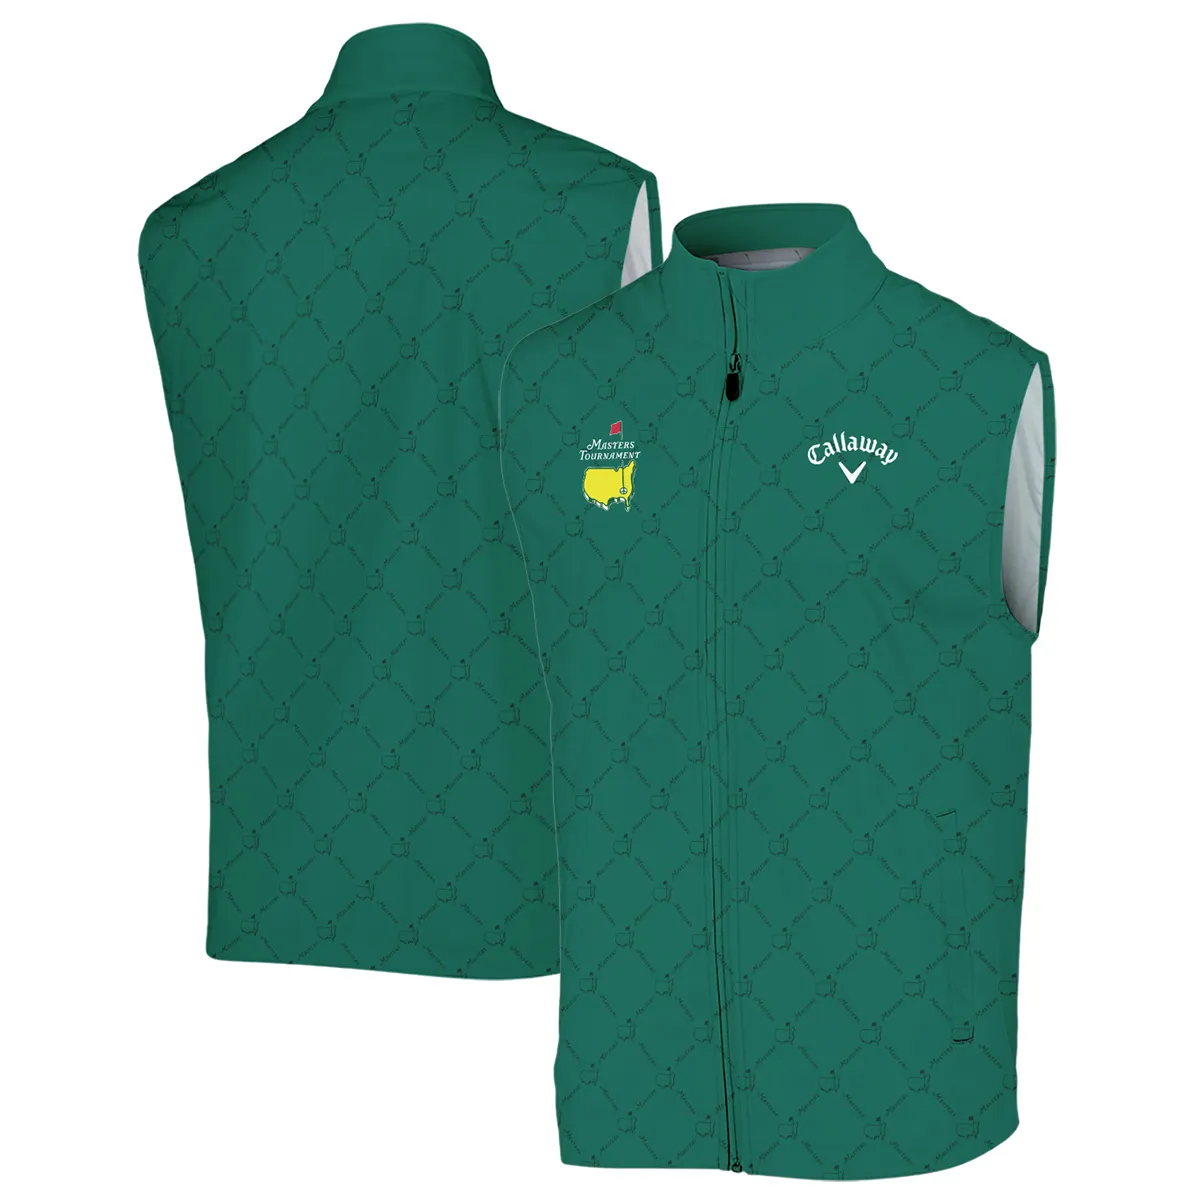 Golf Sport Pattern Color Green Mix Black Masters Tournament Callaway Sleeveless Jacket Style Classic